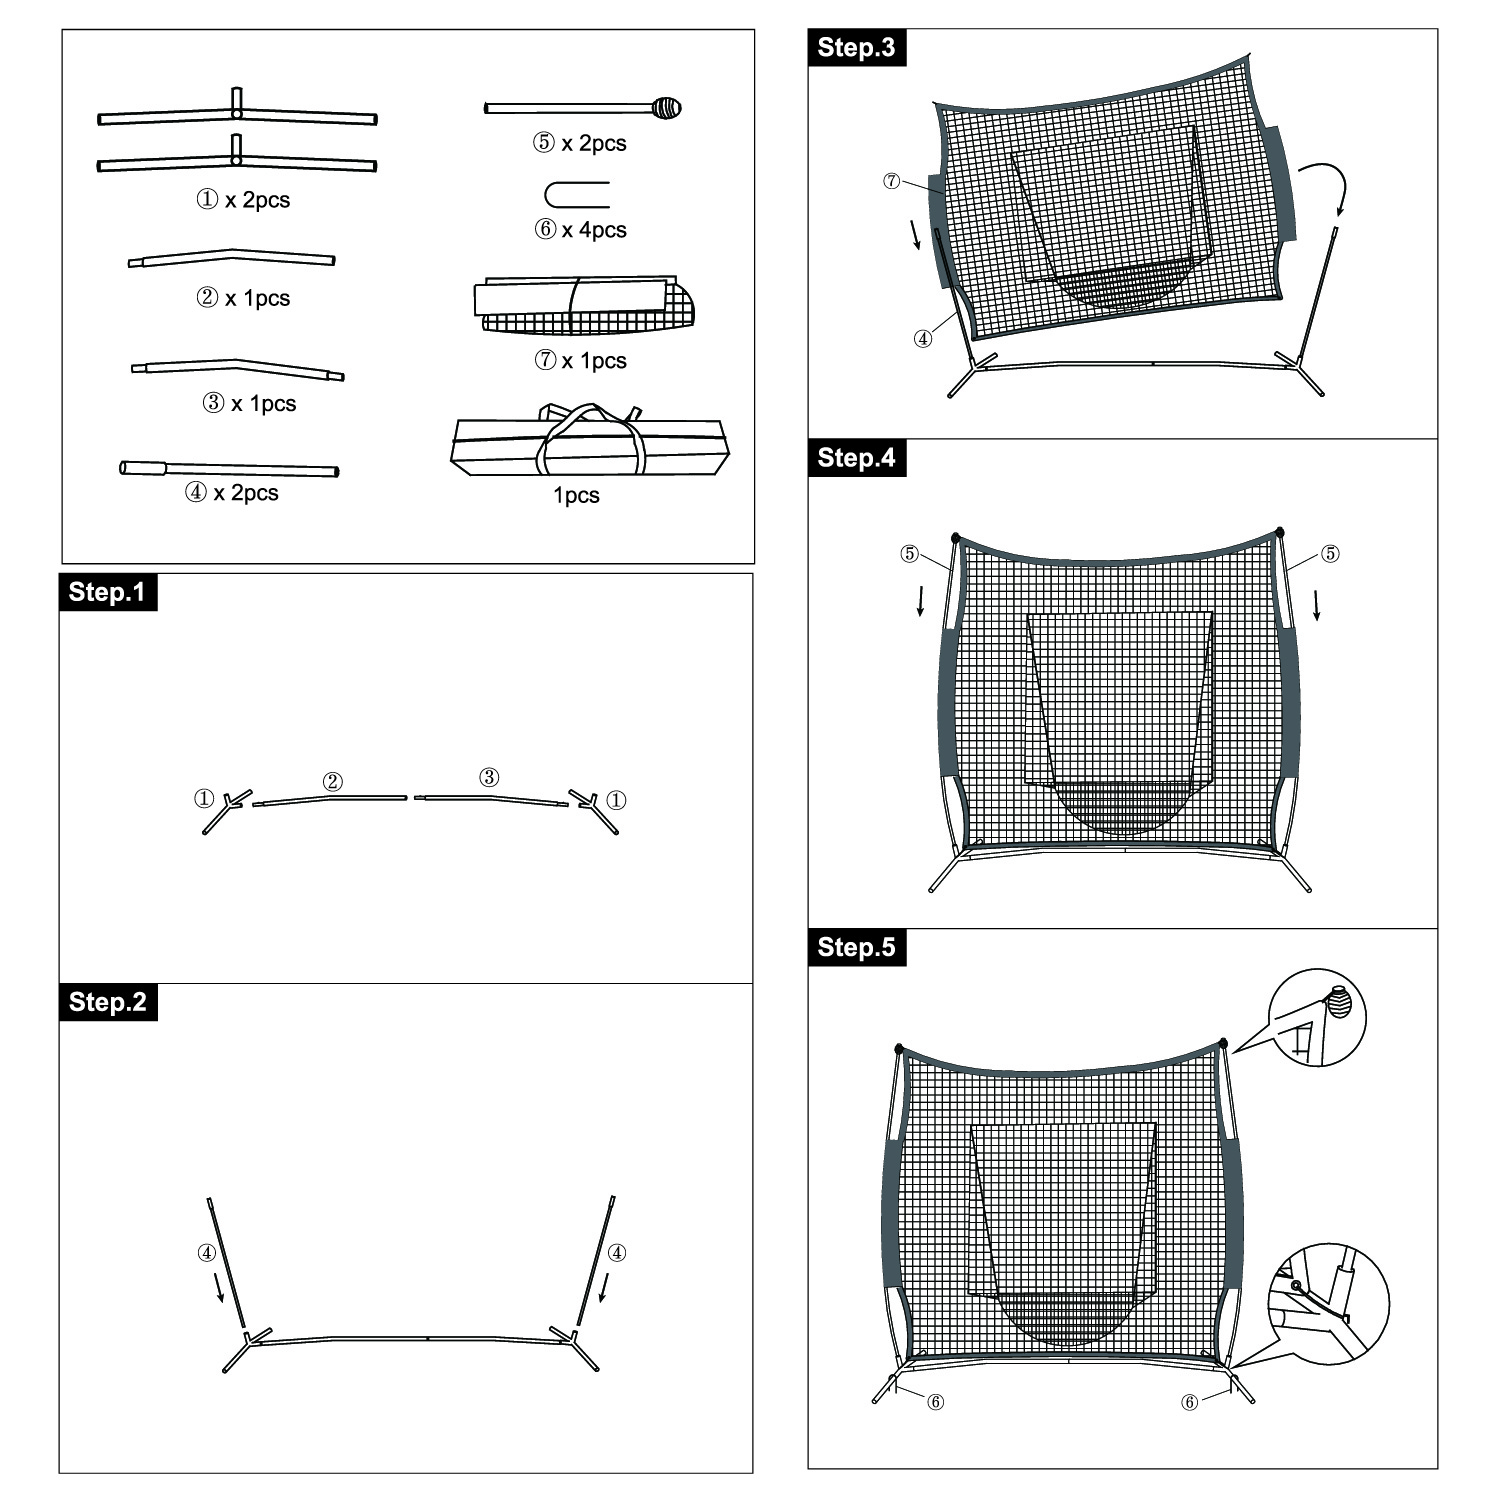 Ollieroo 7'x7' Baseball & Softball Practice Net for Hitting, Pitching - Includes Carry Bag - image 10 of 11